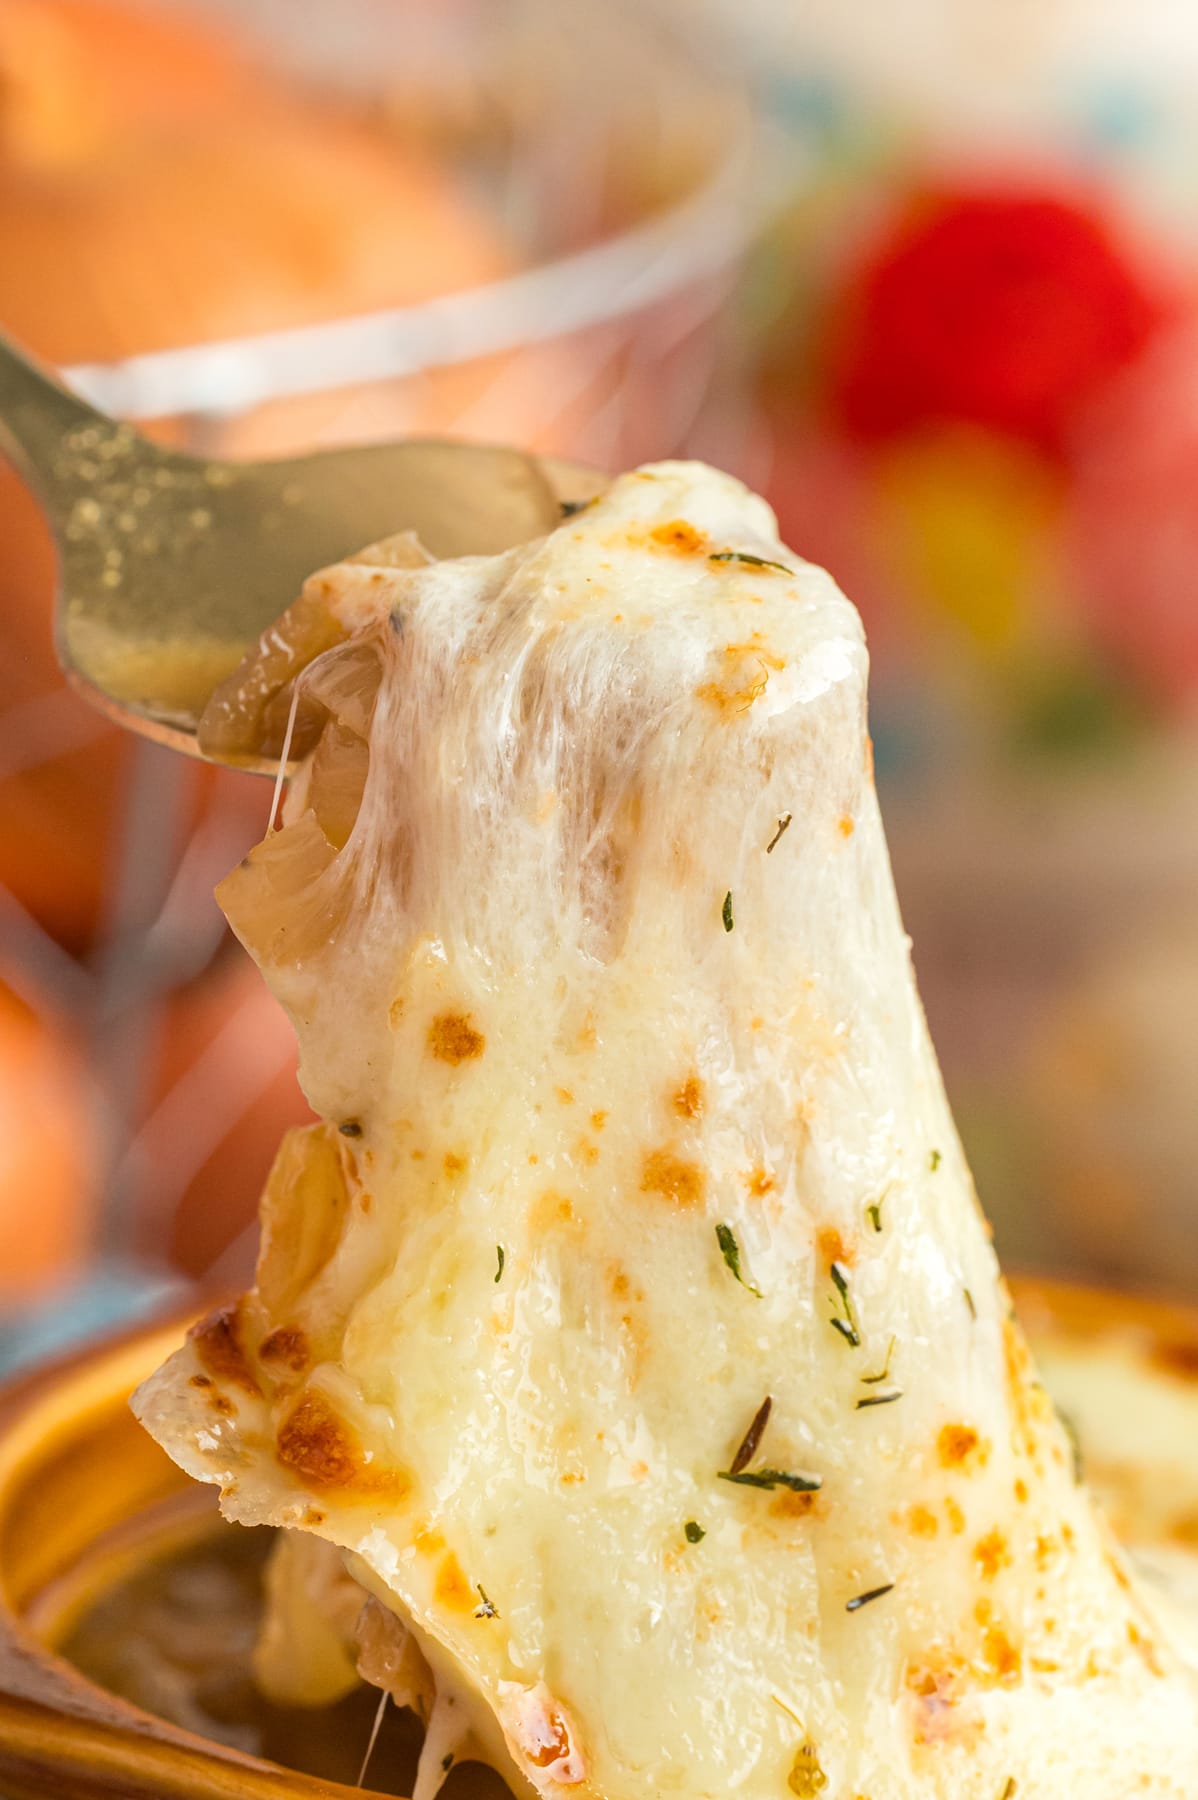 A close up of the cheese being pulled up from a bowl of French onion soup